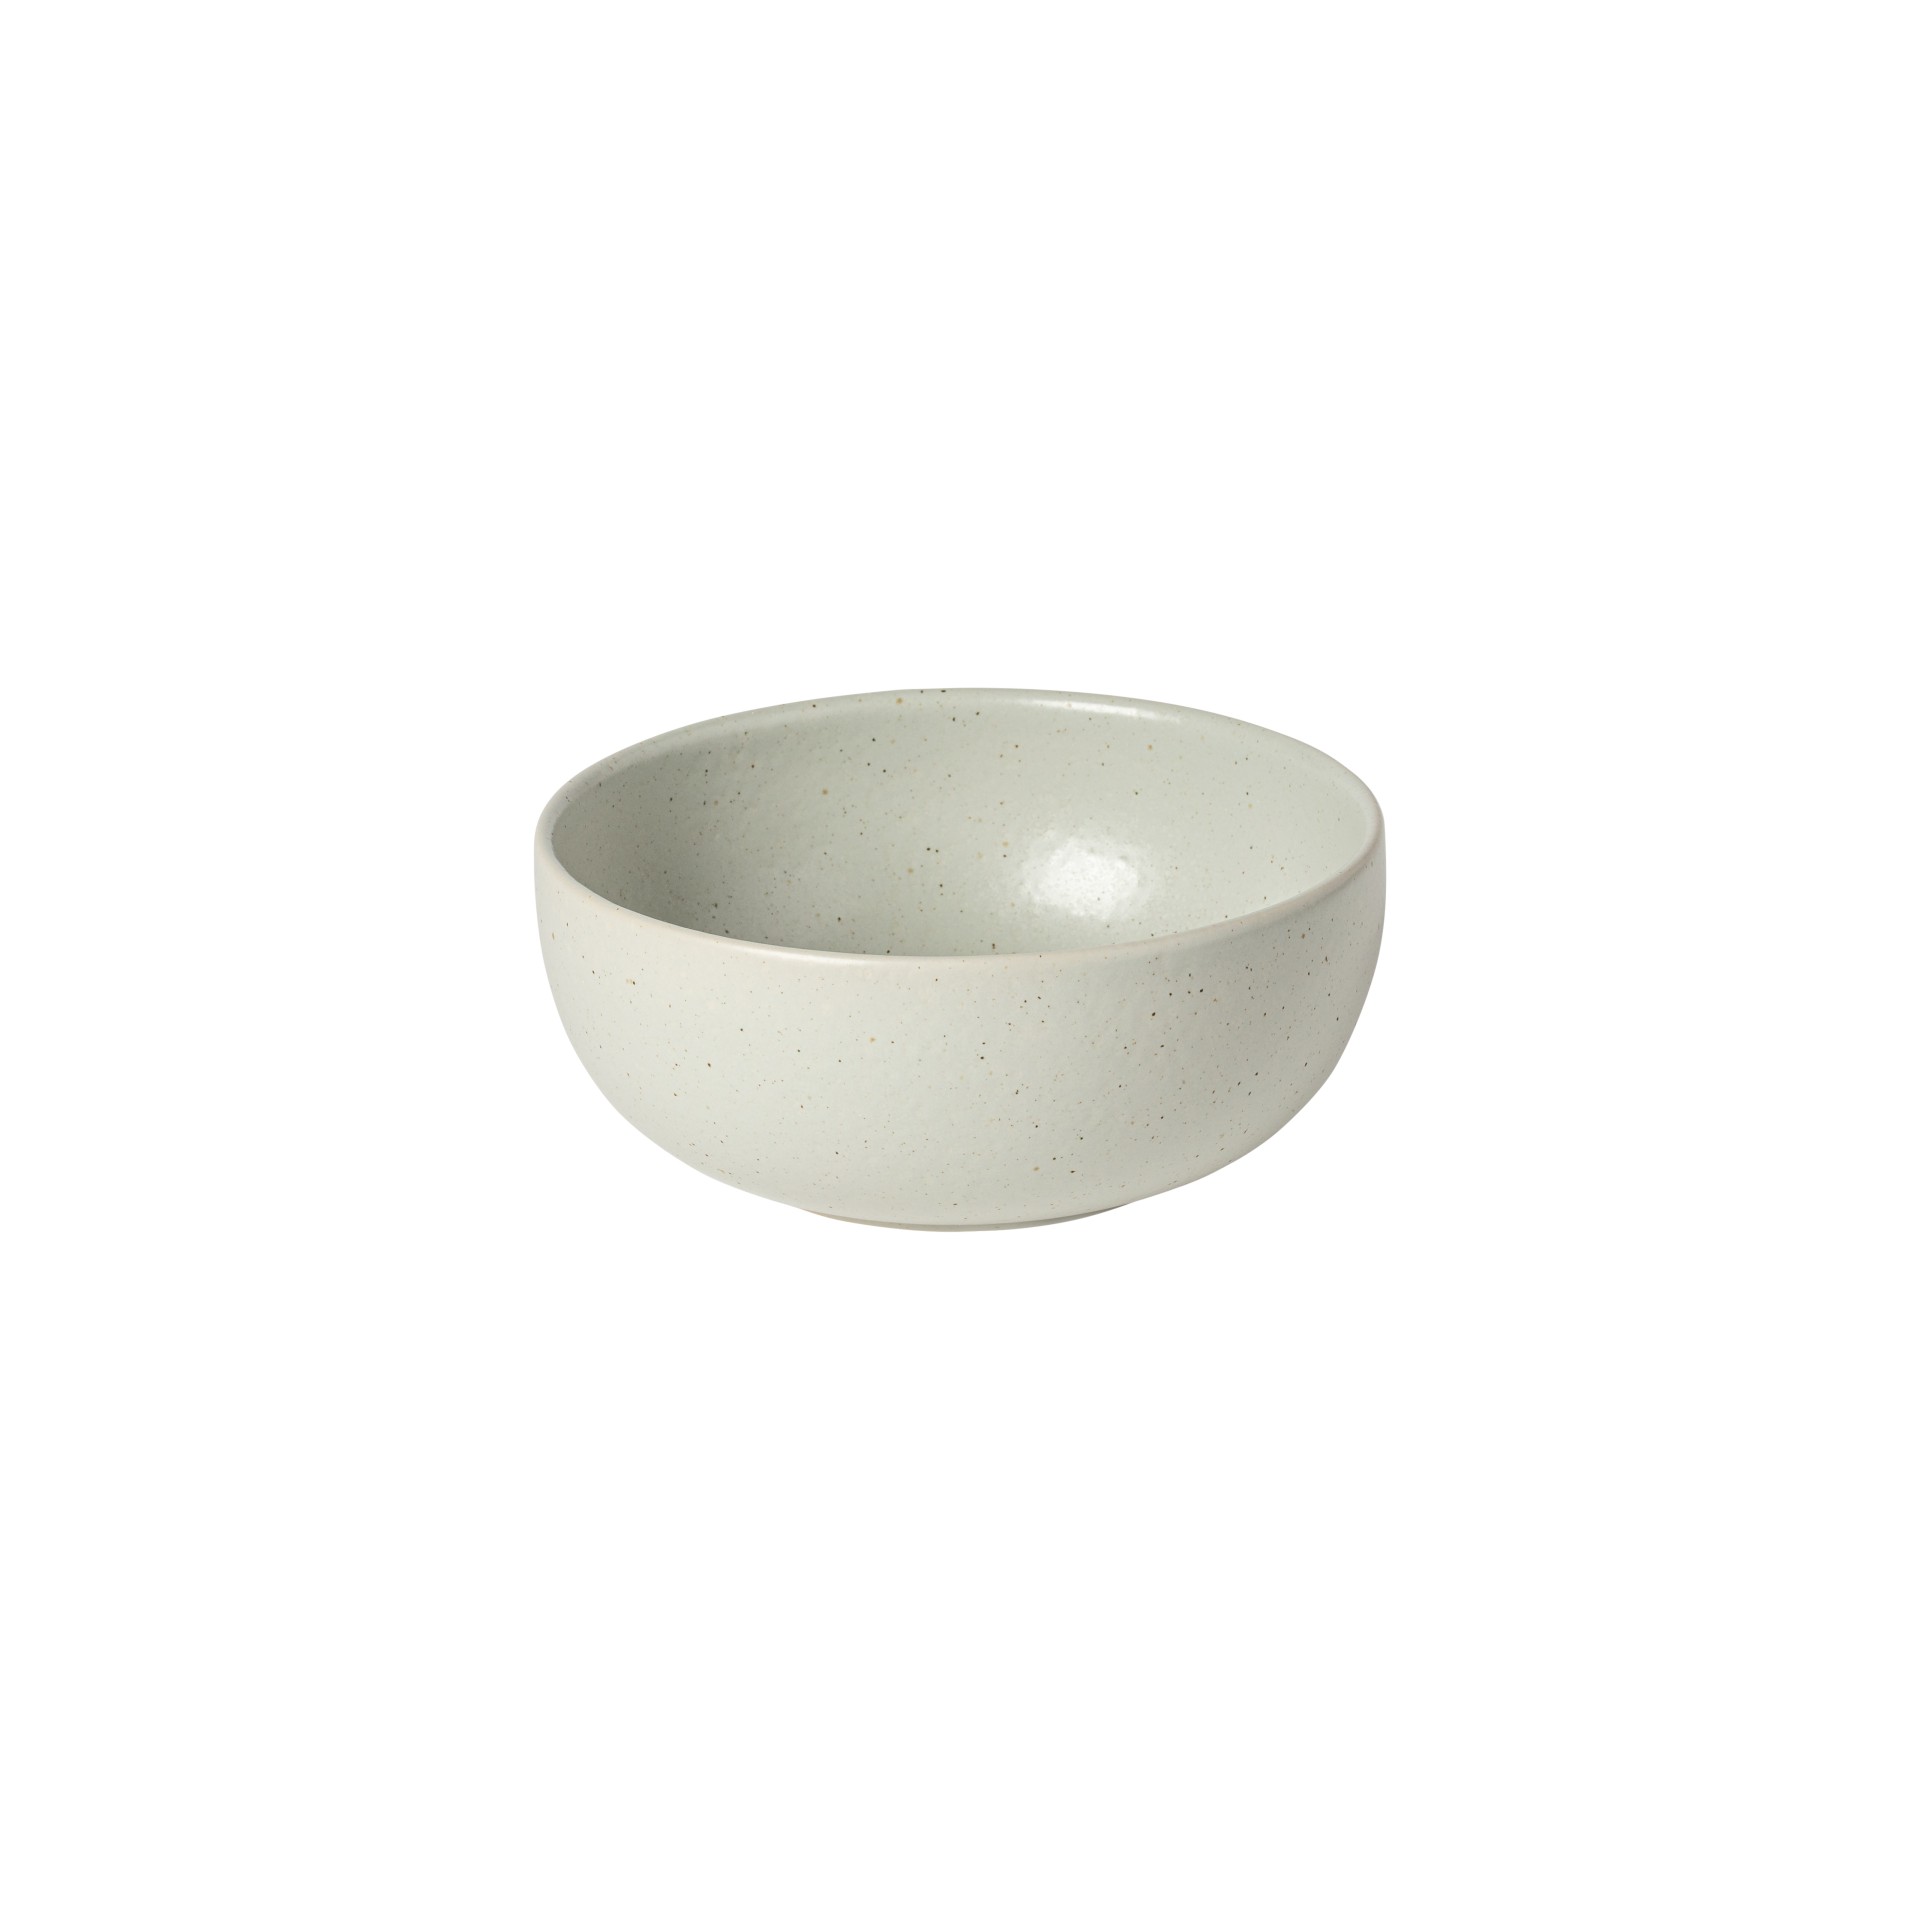 Soup / Cereal Bowl Pacifica by Casafina